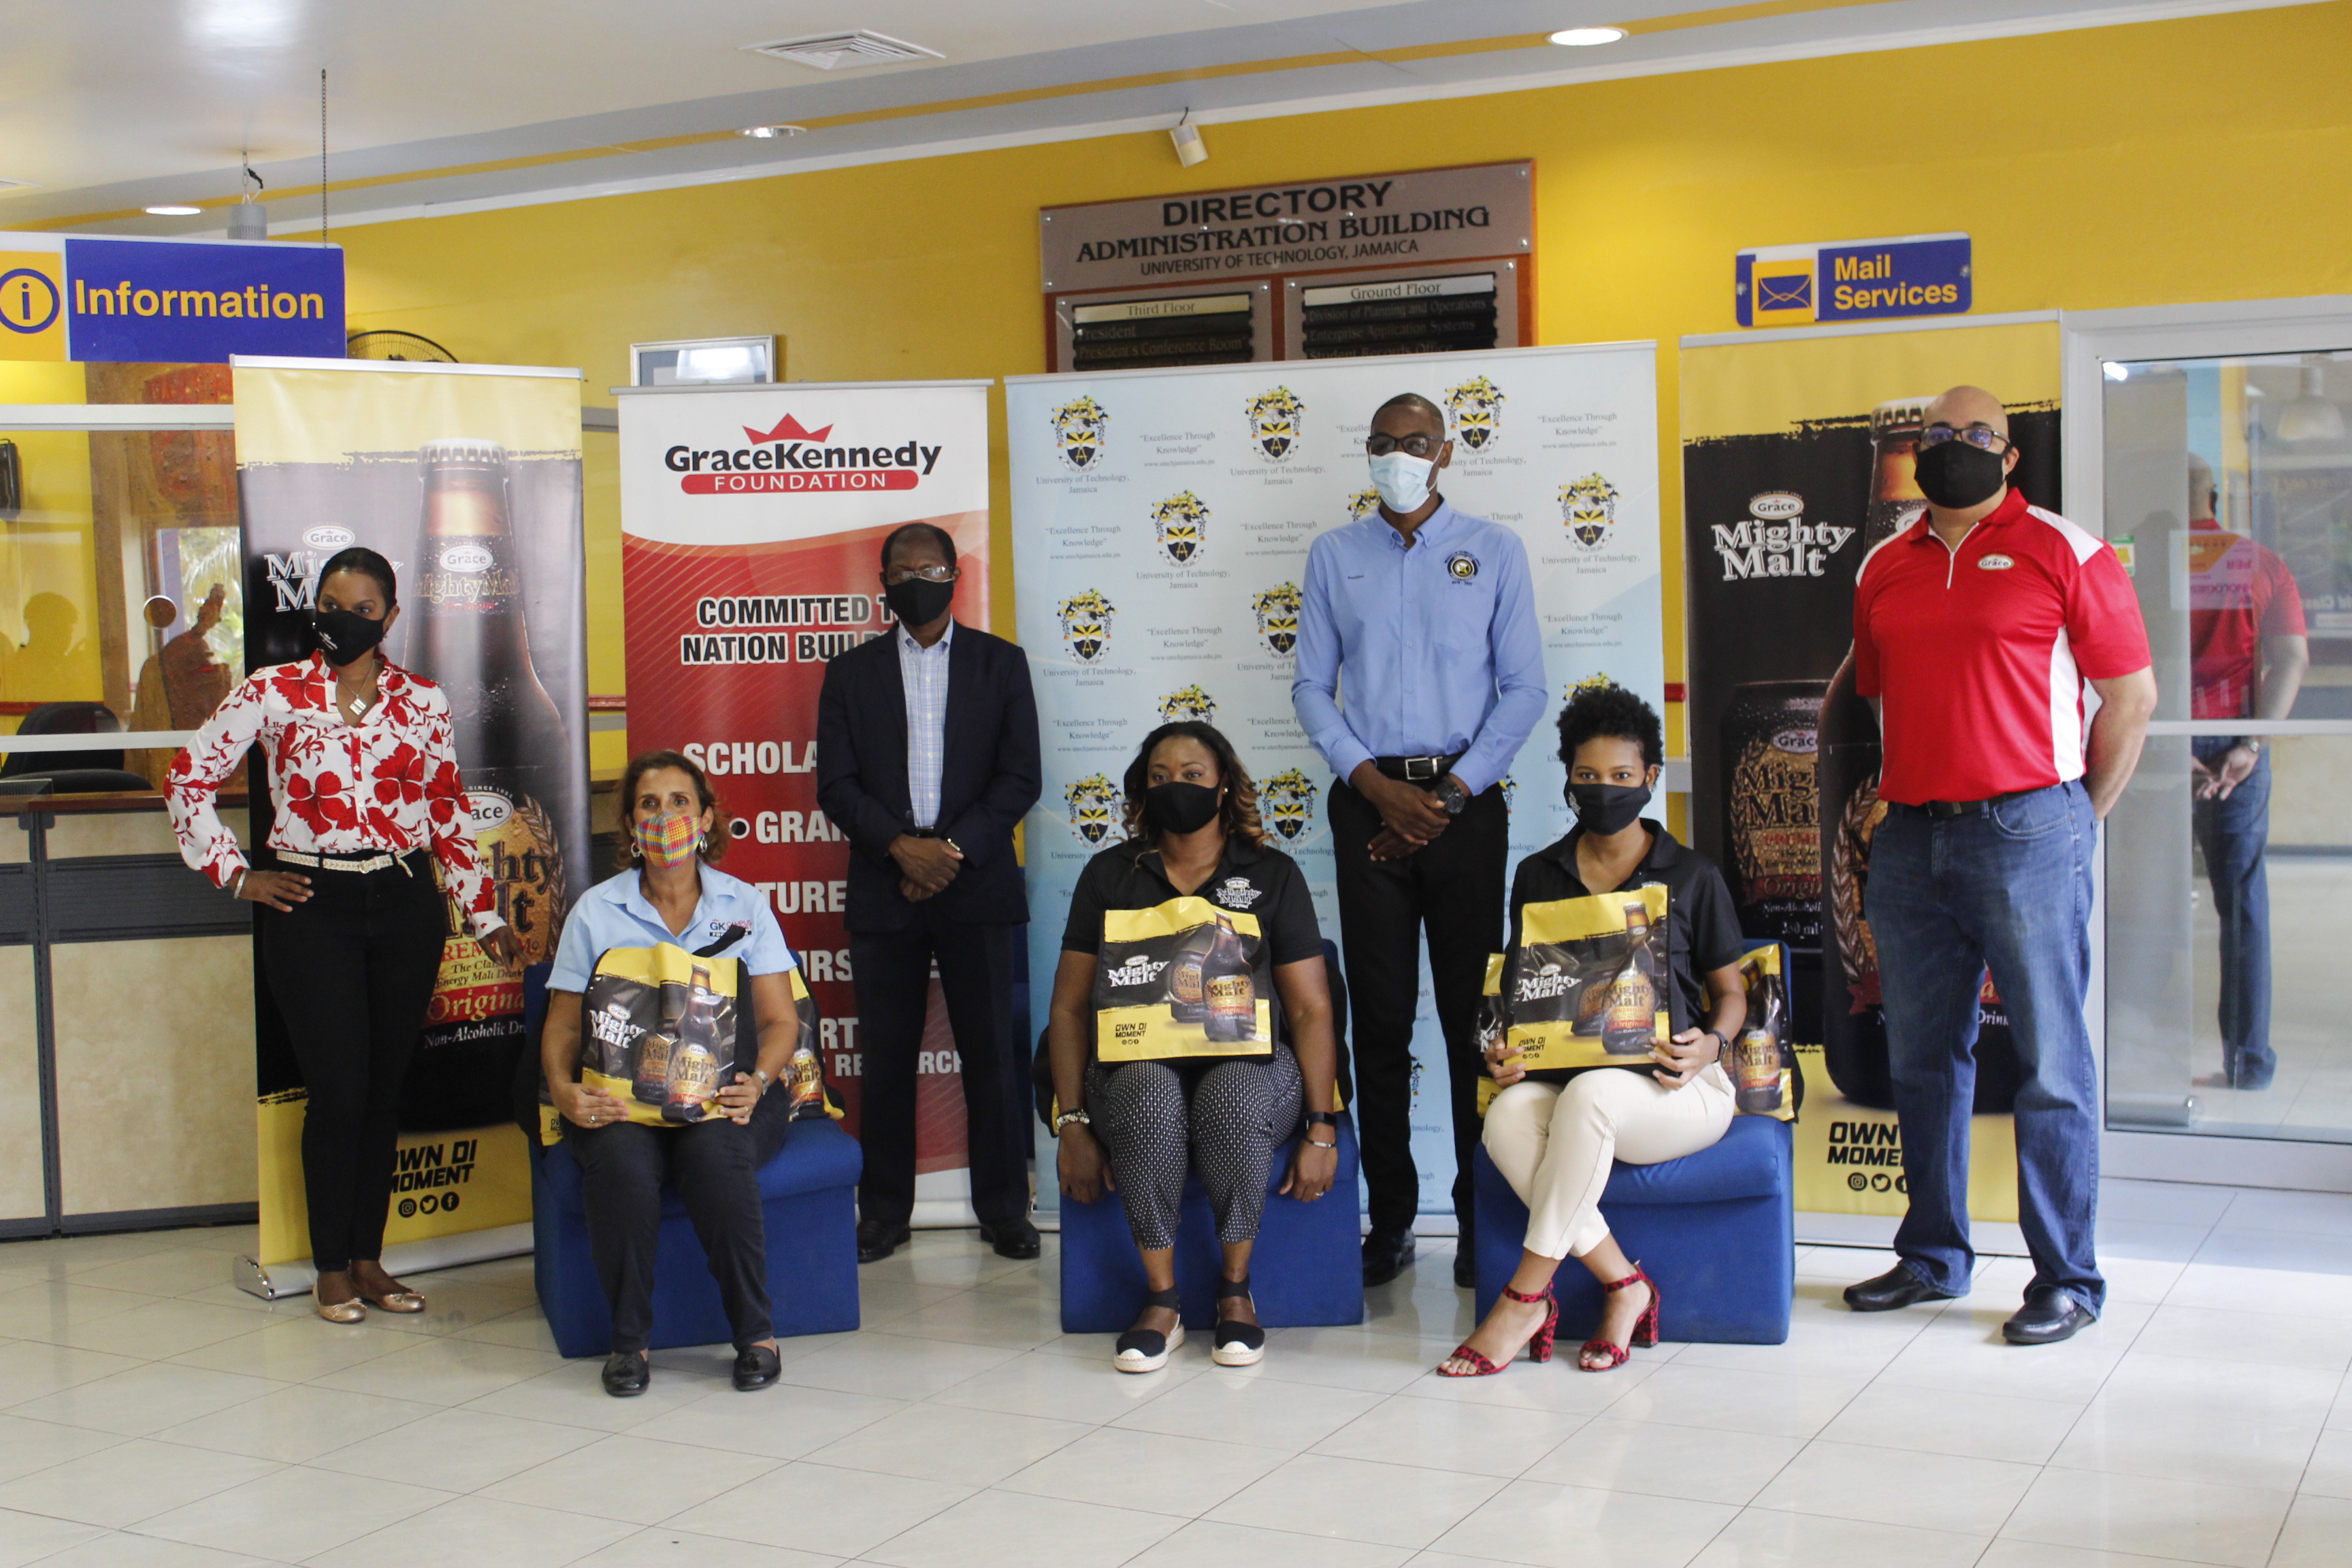 UTech, Jamaica Students Receive Care Packages from Mighty Malt through the Grace Kennedy Foundation